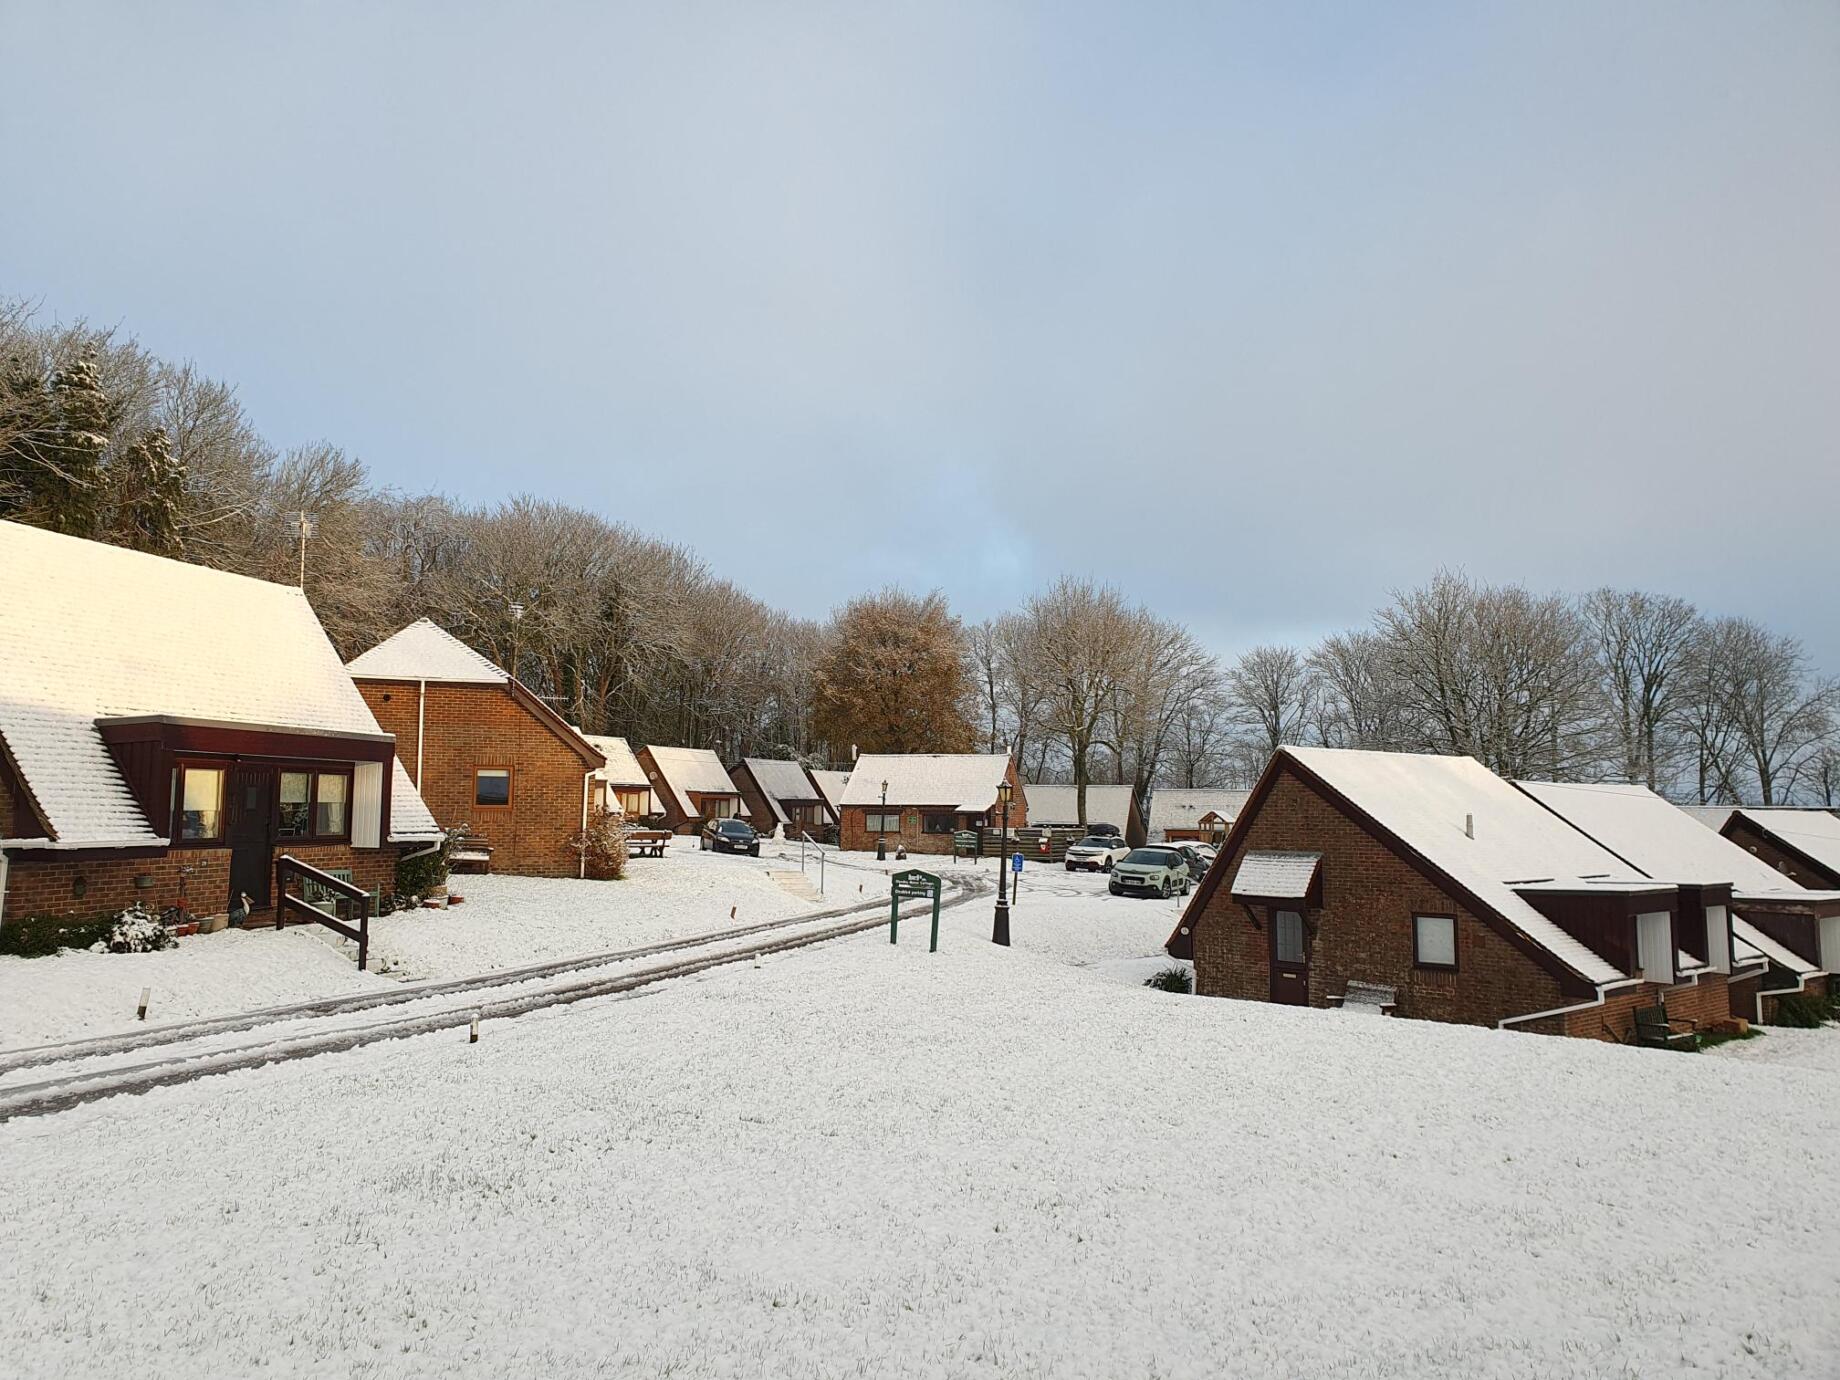 Cottages covered with snow